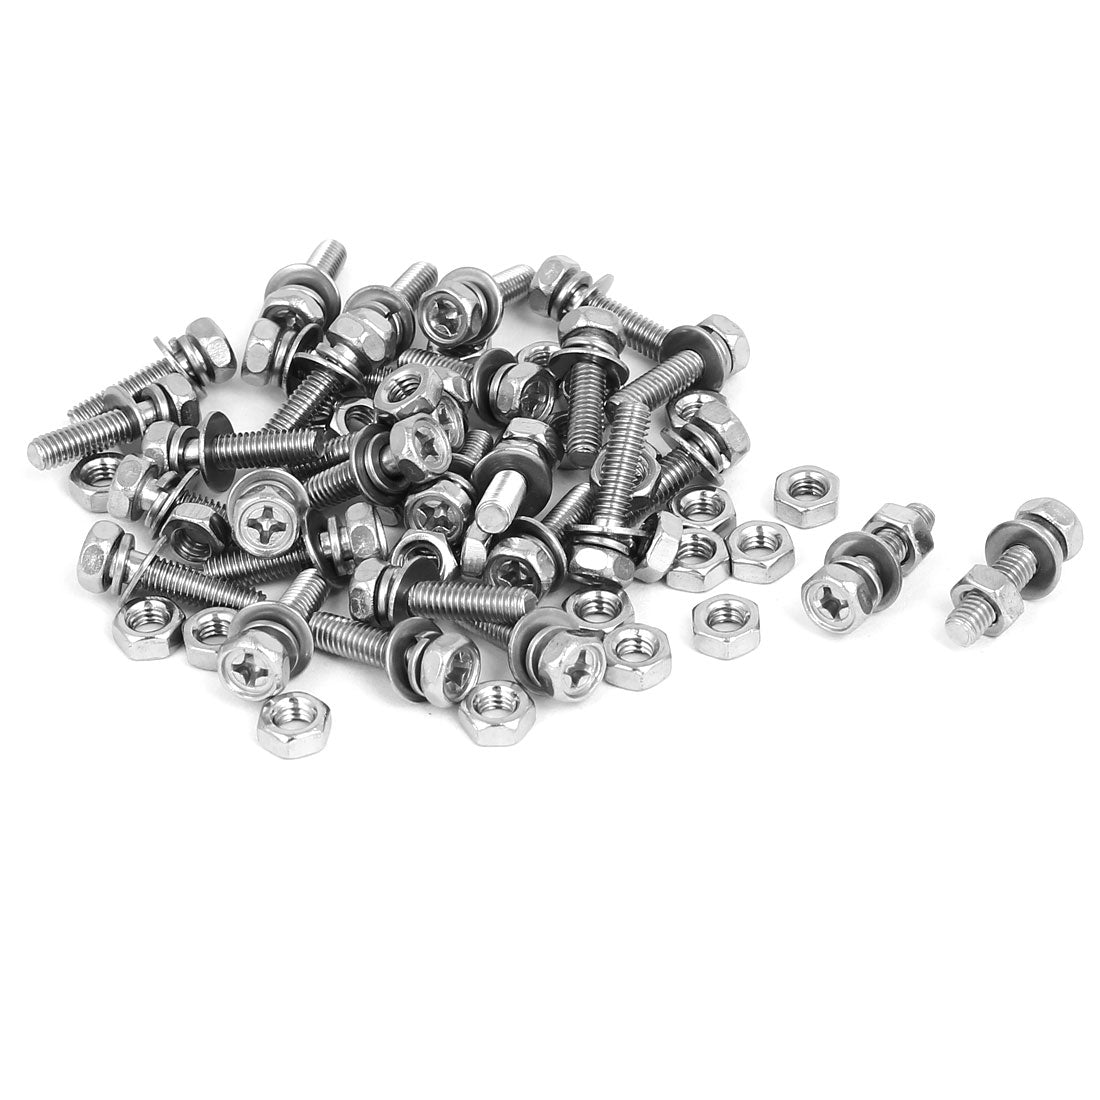 uxcell Uxcell M4 x 16mm 304 Stainless Steel Phillips Hex Head Bolts Nuts w Washers 30 Sets